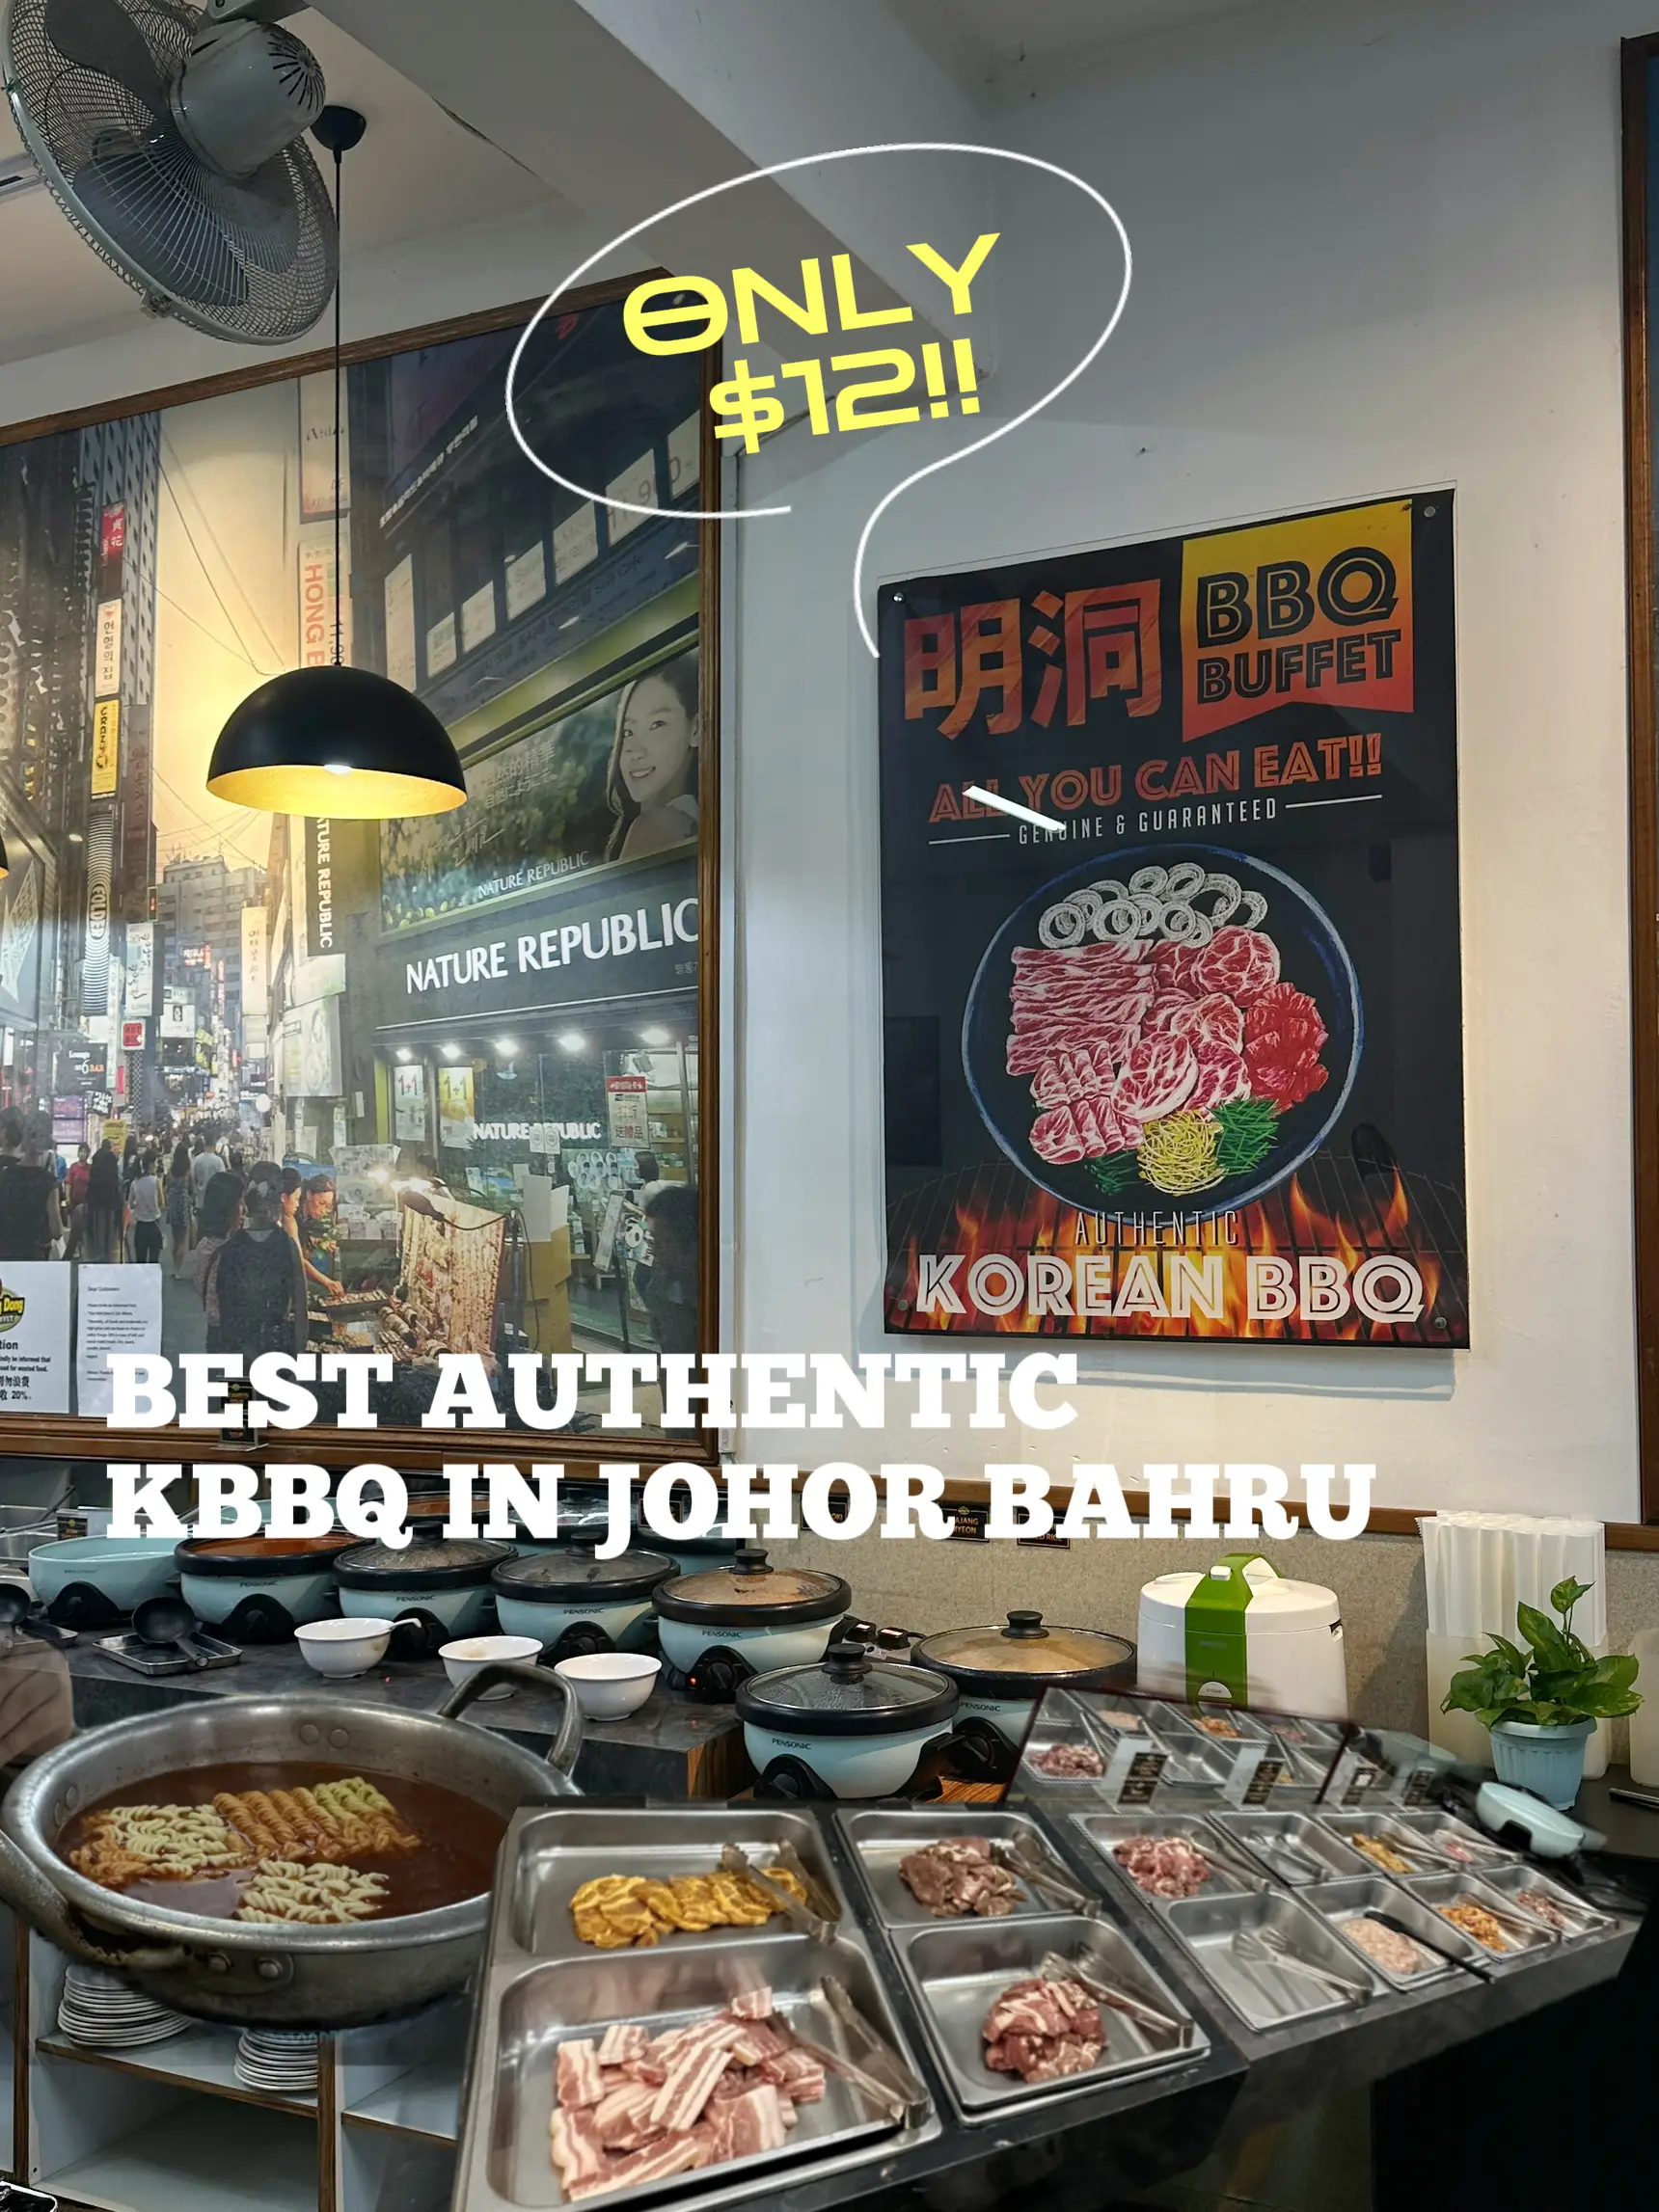 MUST GO IN JB: KBBQ BUFFET UNDER $12SGD! 's images